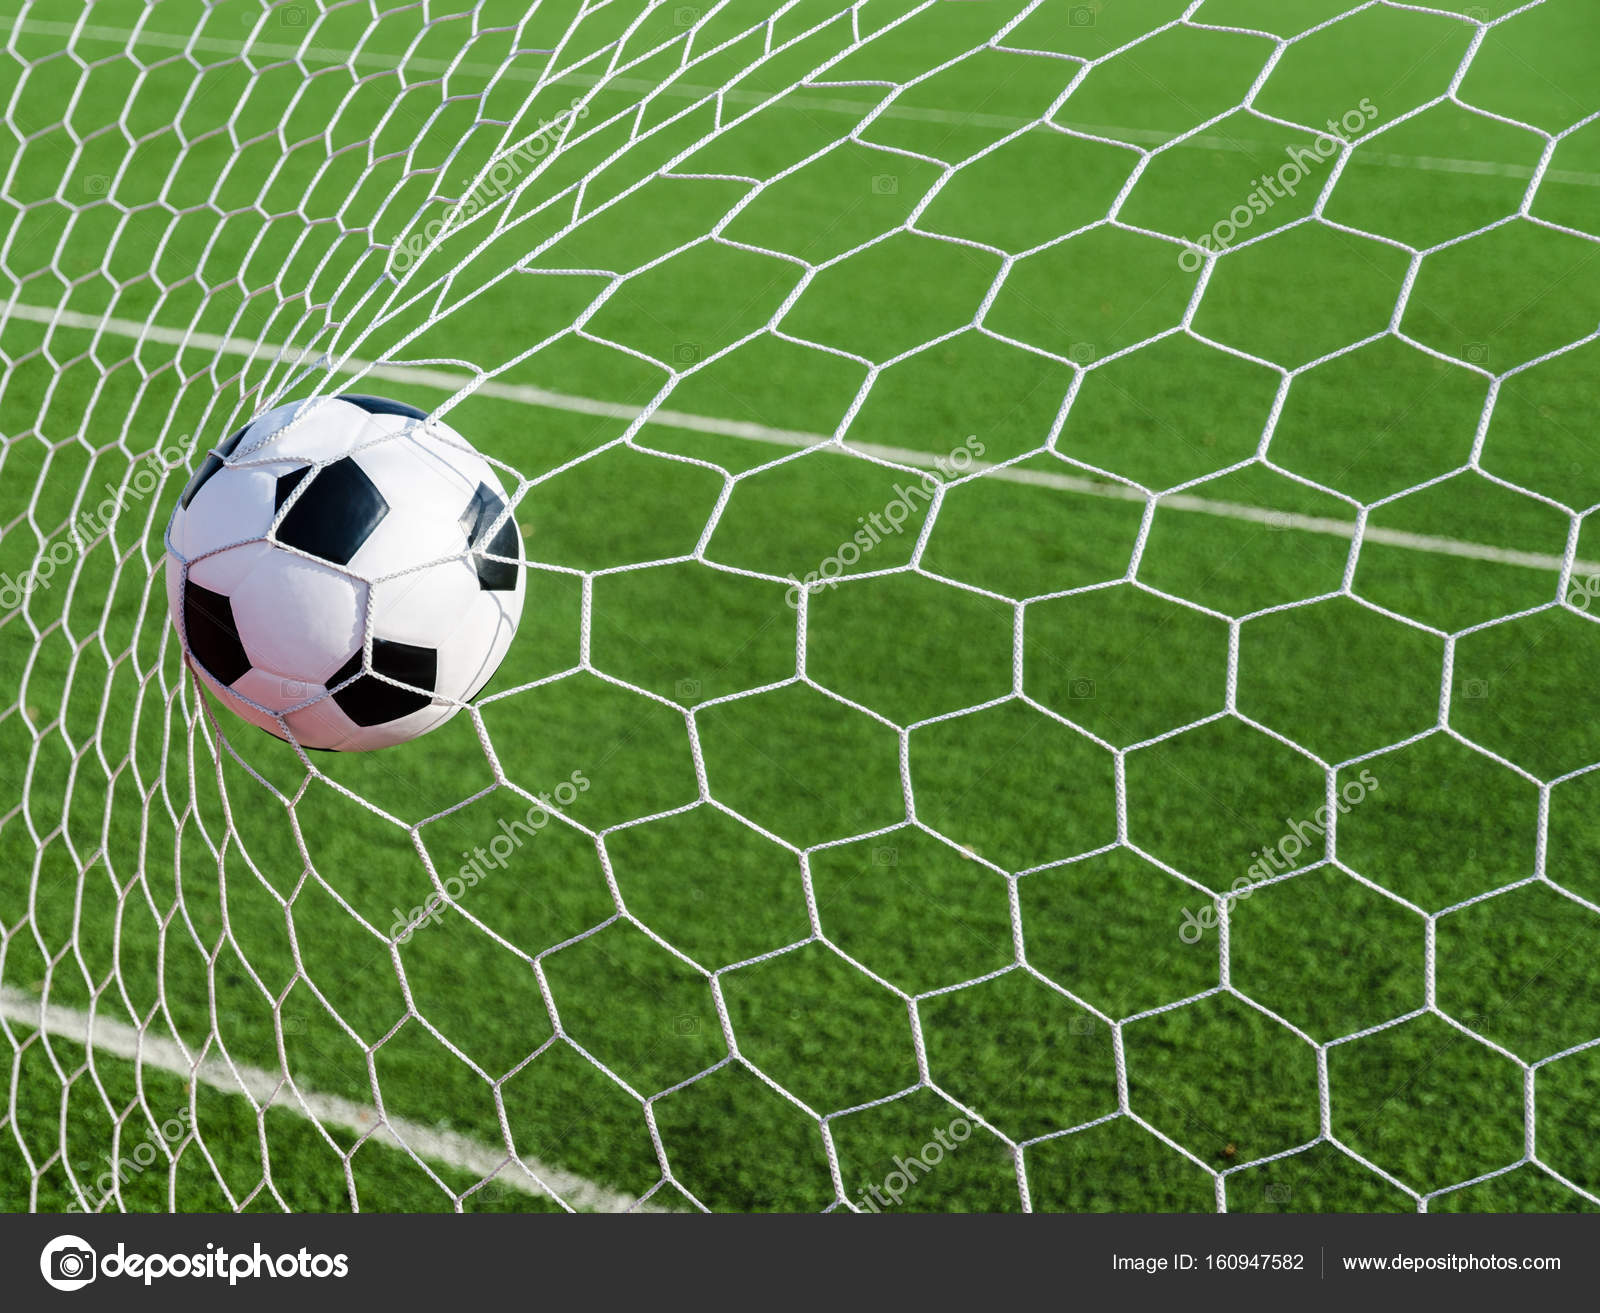 Soccer Football In Goal Net With Green Grass Field Stock Photo By C Ohmega19